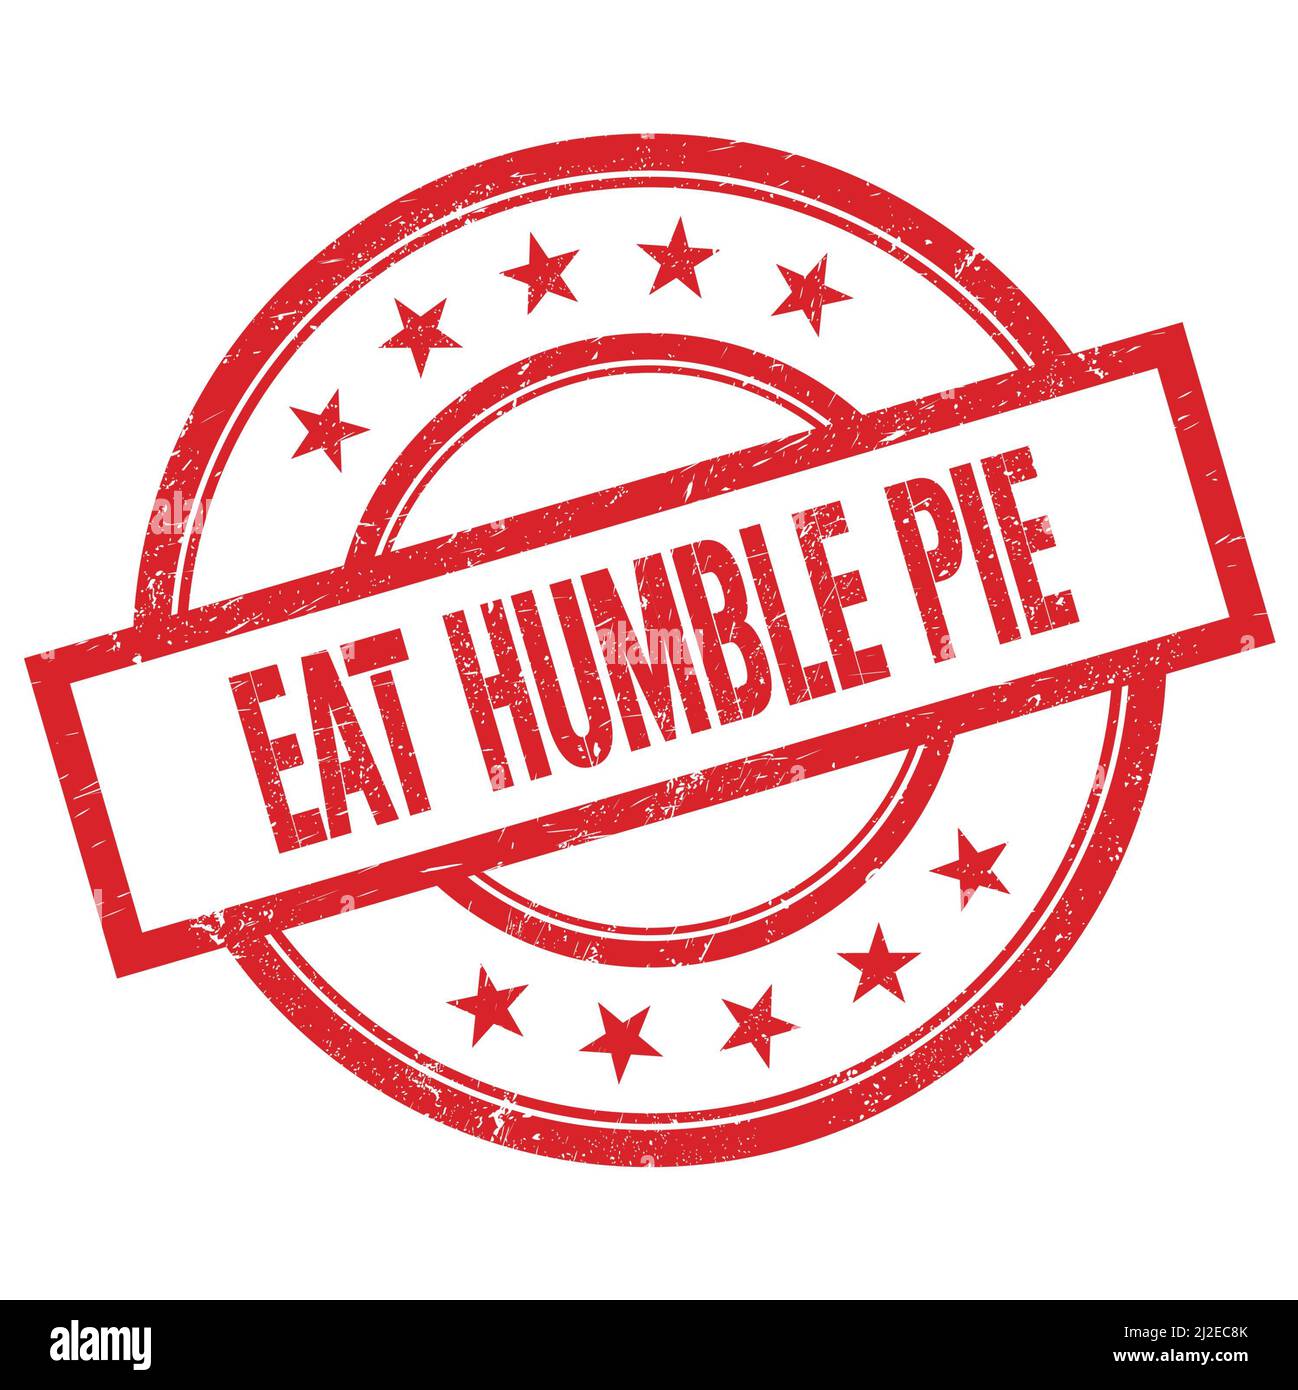 EAT HUMBLE PIE text written on blue round vintage rubber stamp Stock Photo  - Alamy